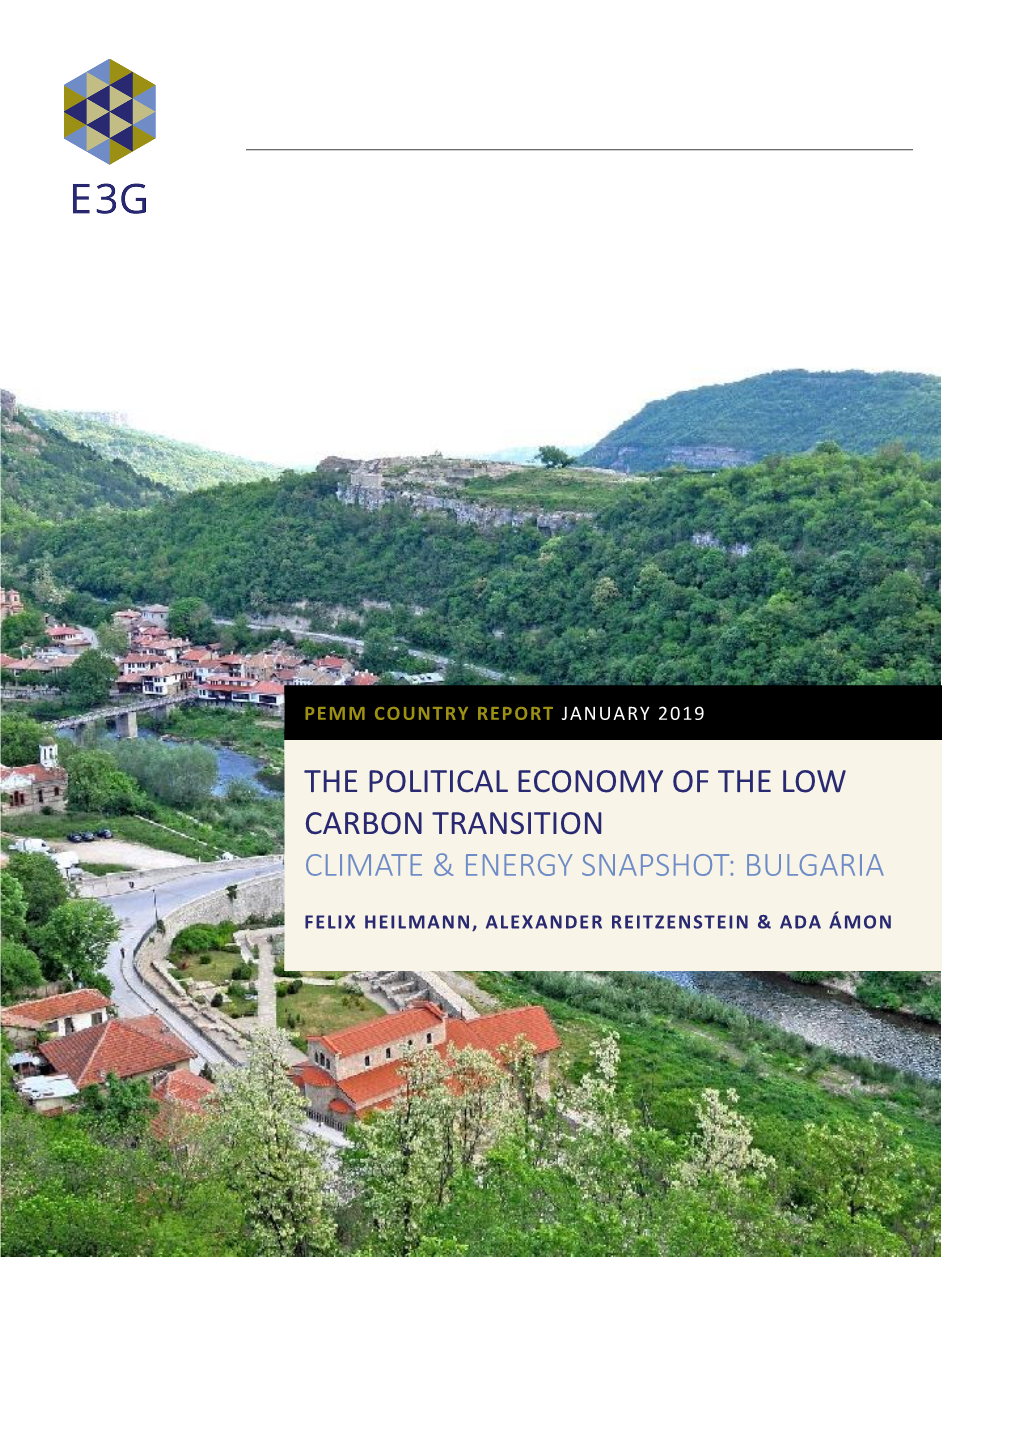 The Political Economy of the Low Carbon Transition Climate & Energy Snapshot: Bulgaria